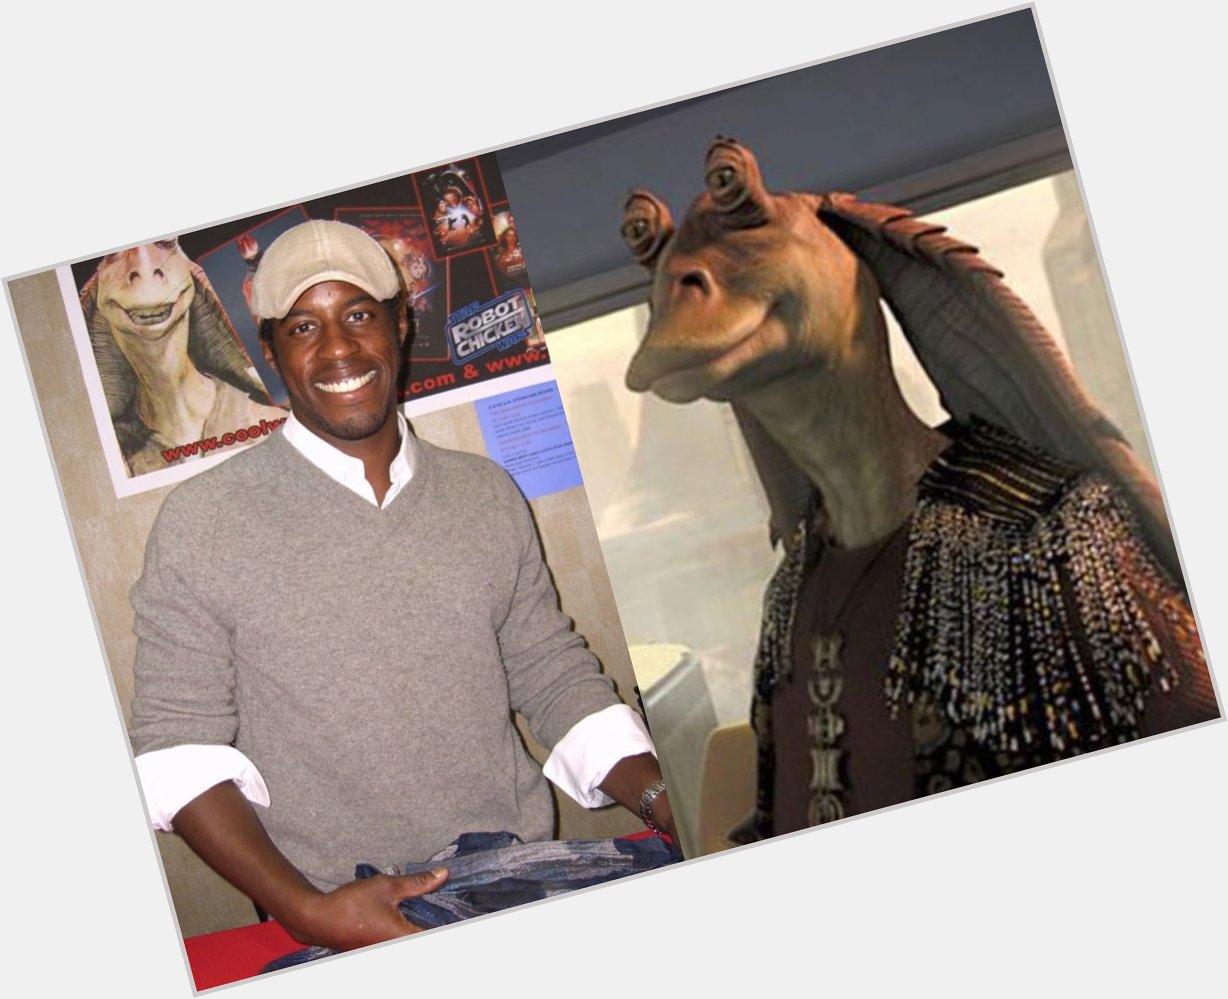 Happy 48th Birthday to Ahmed Best! The actor who played Jar Jar Binks in the Star Wars prequel trilogy. 